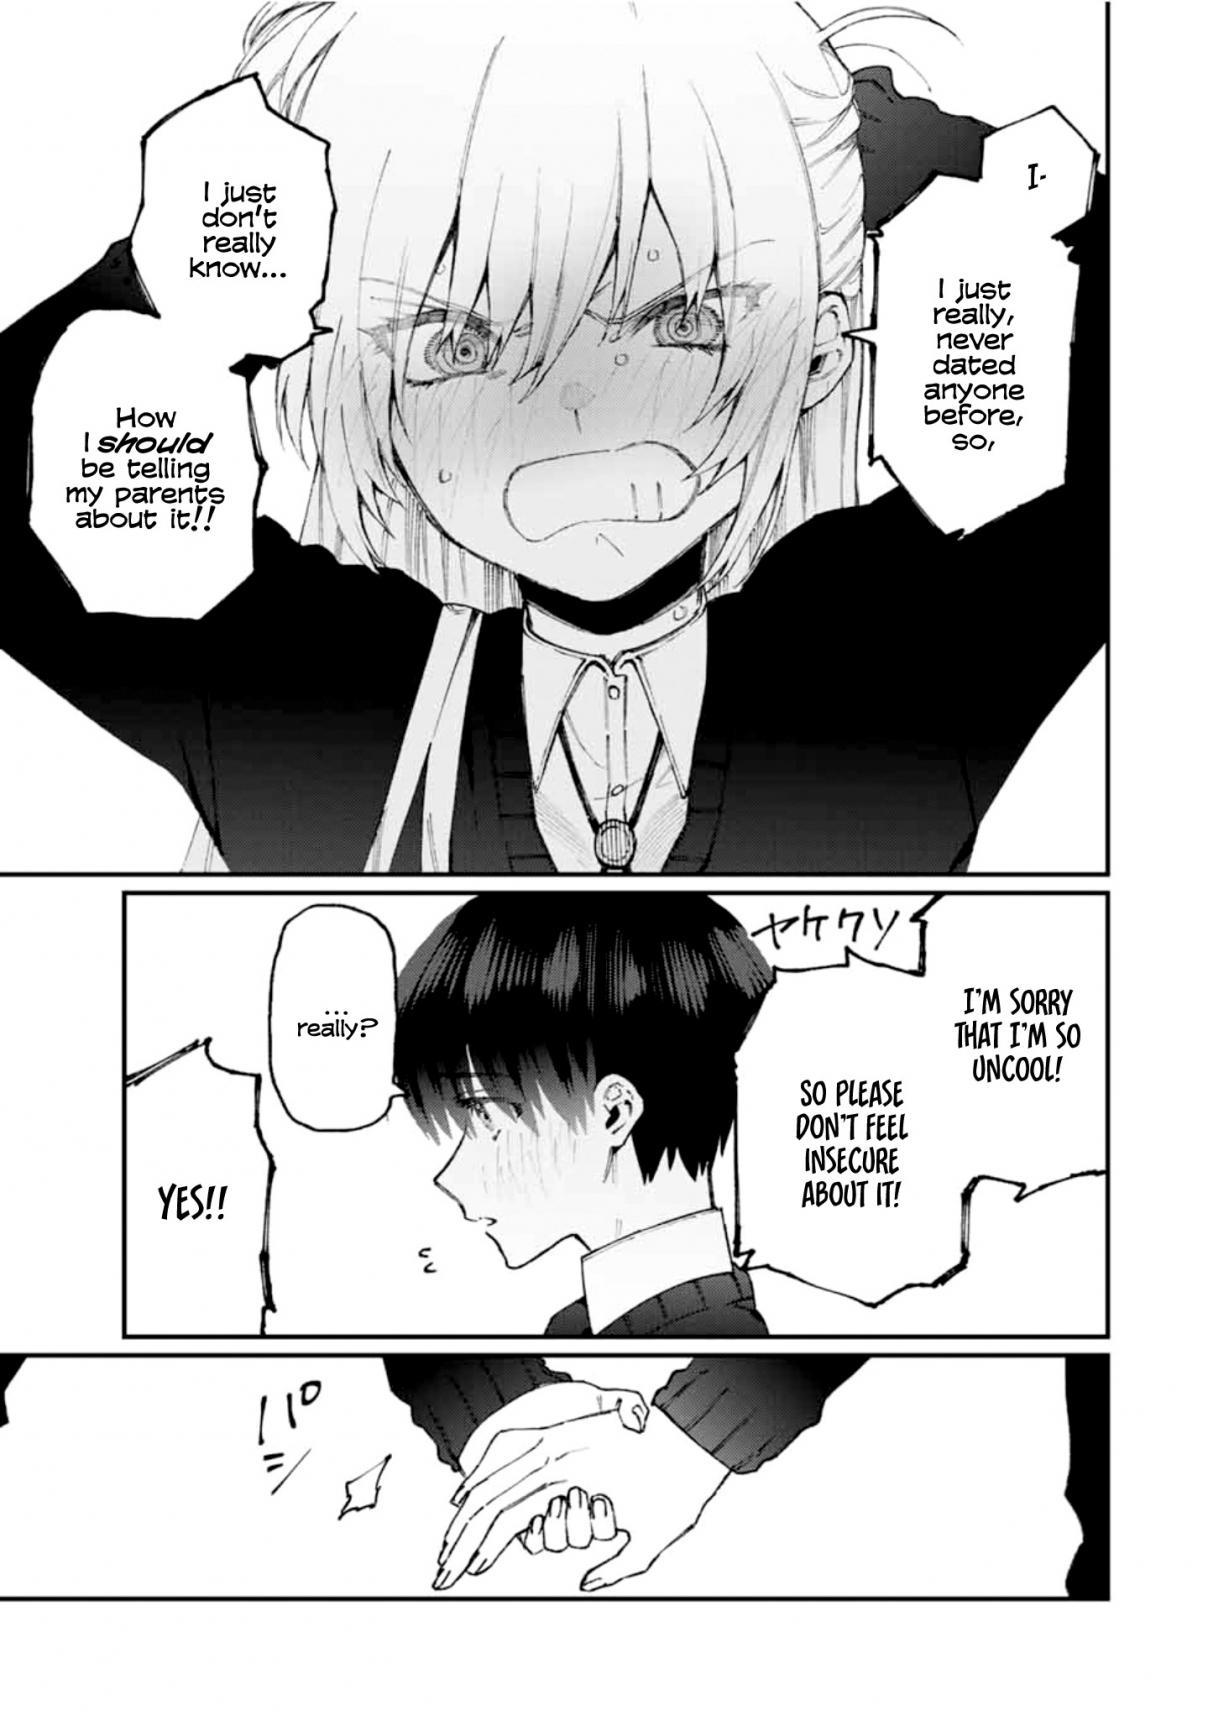 That Girl Is Not Just Cute Vol. 6 Ch. 65